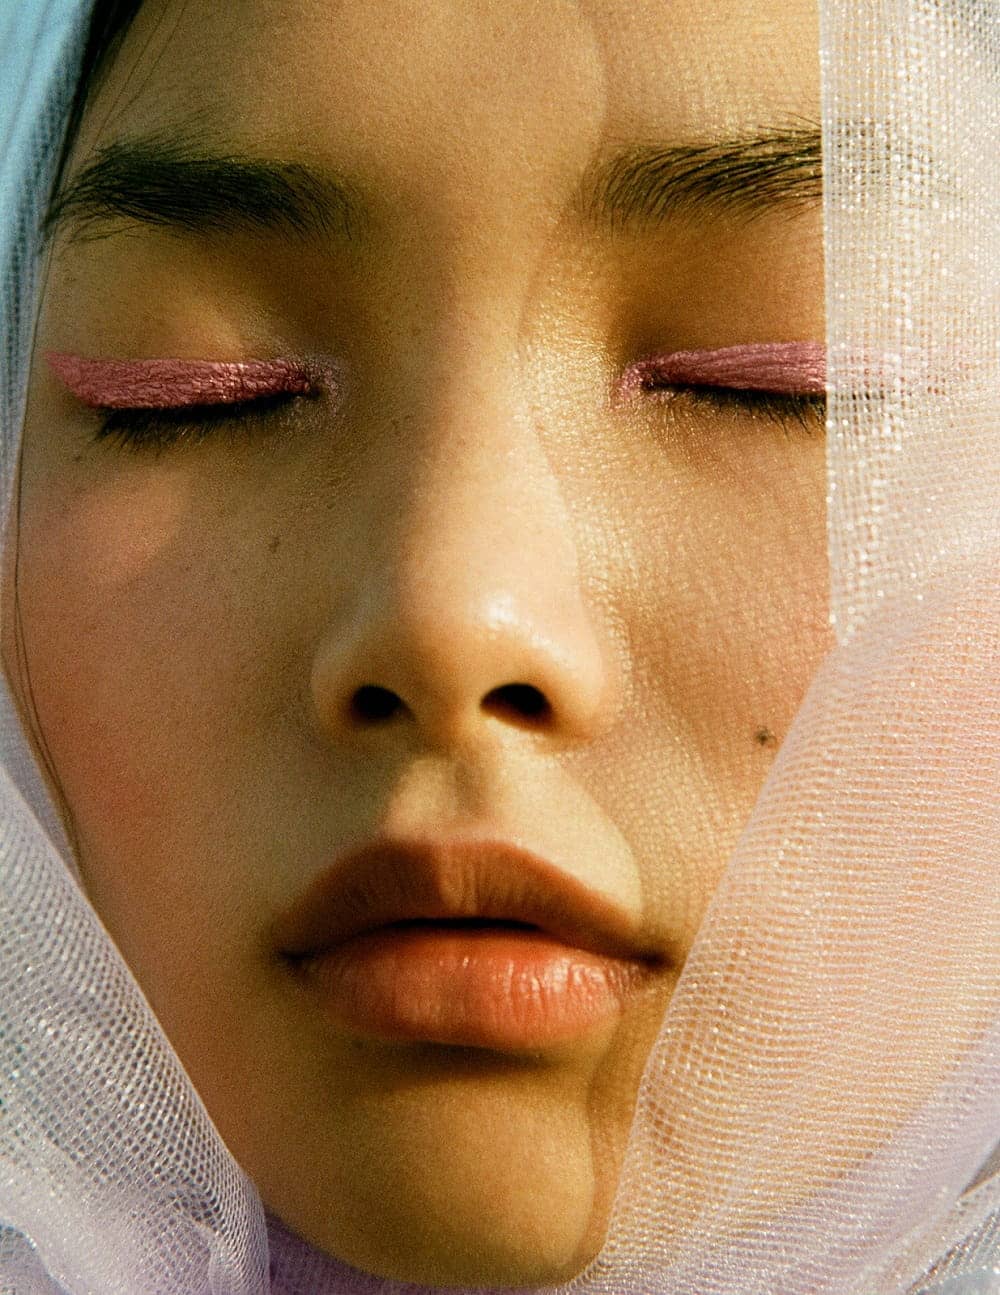 Ling Chen by Ina Lekiewicz for Vogue Portugal September 2019